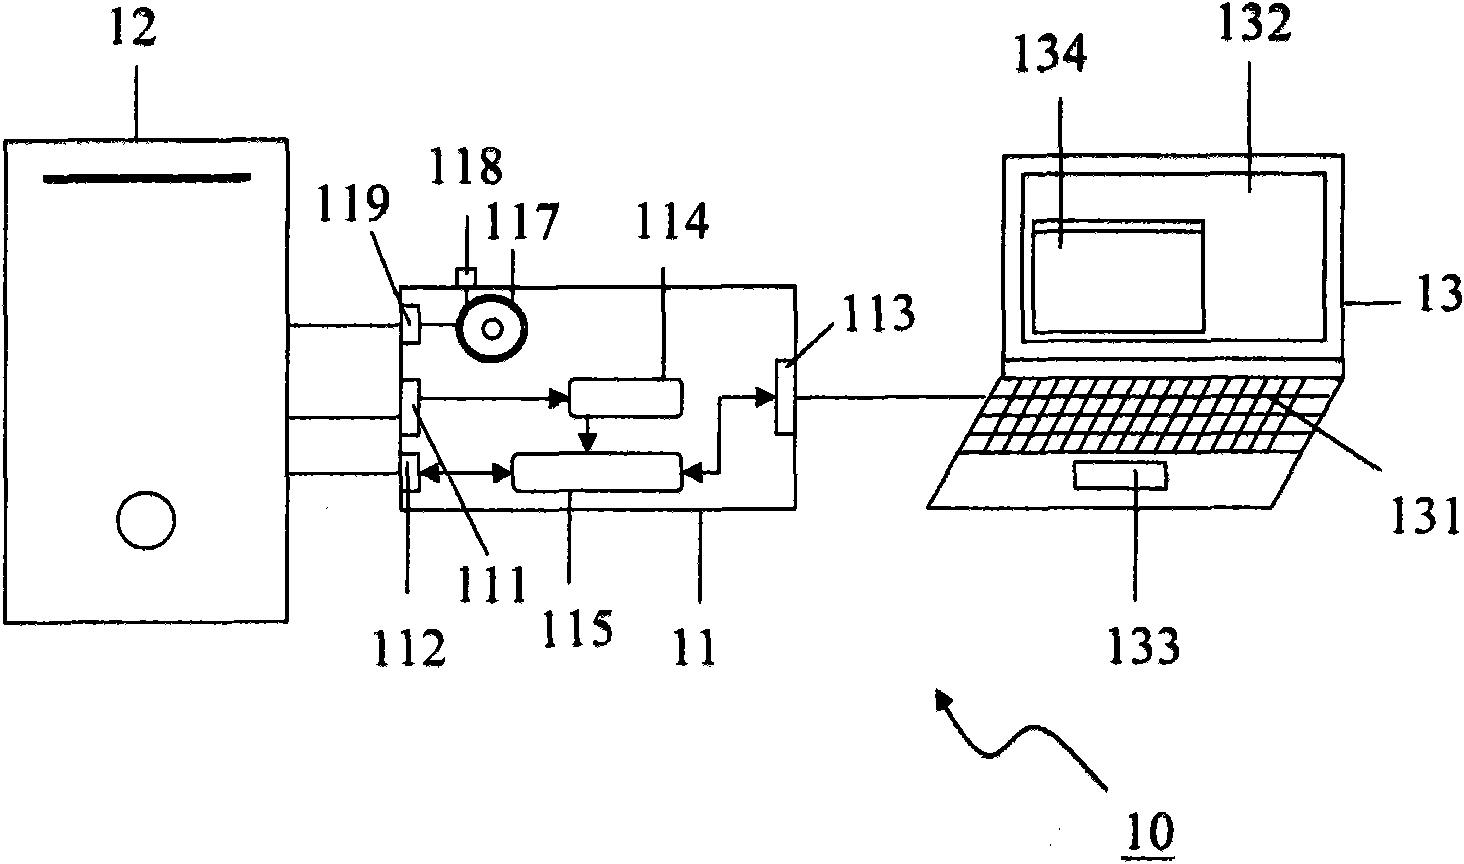 System for controlling a host computer by a portable computer